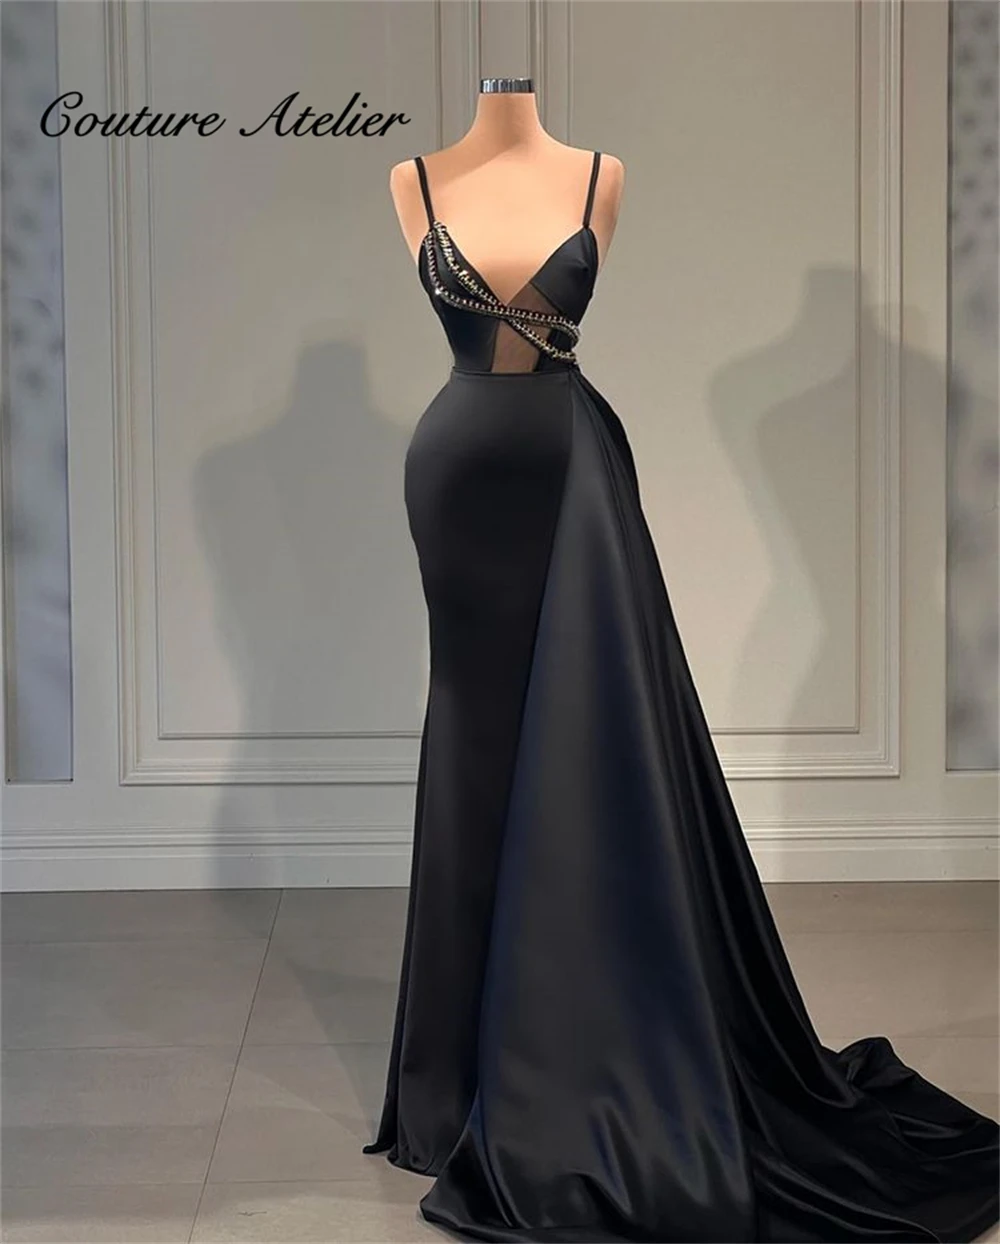 

Black Evening Gown Spaghetti Women Dresses For Party And Wedding Mermiad Prom Dress With Cape Satin فساتين السهرة